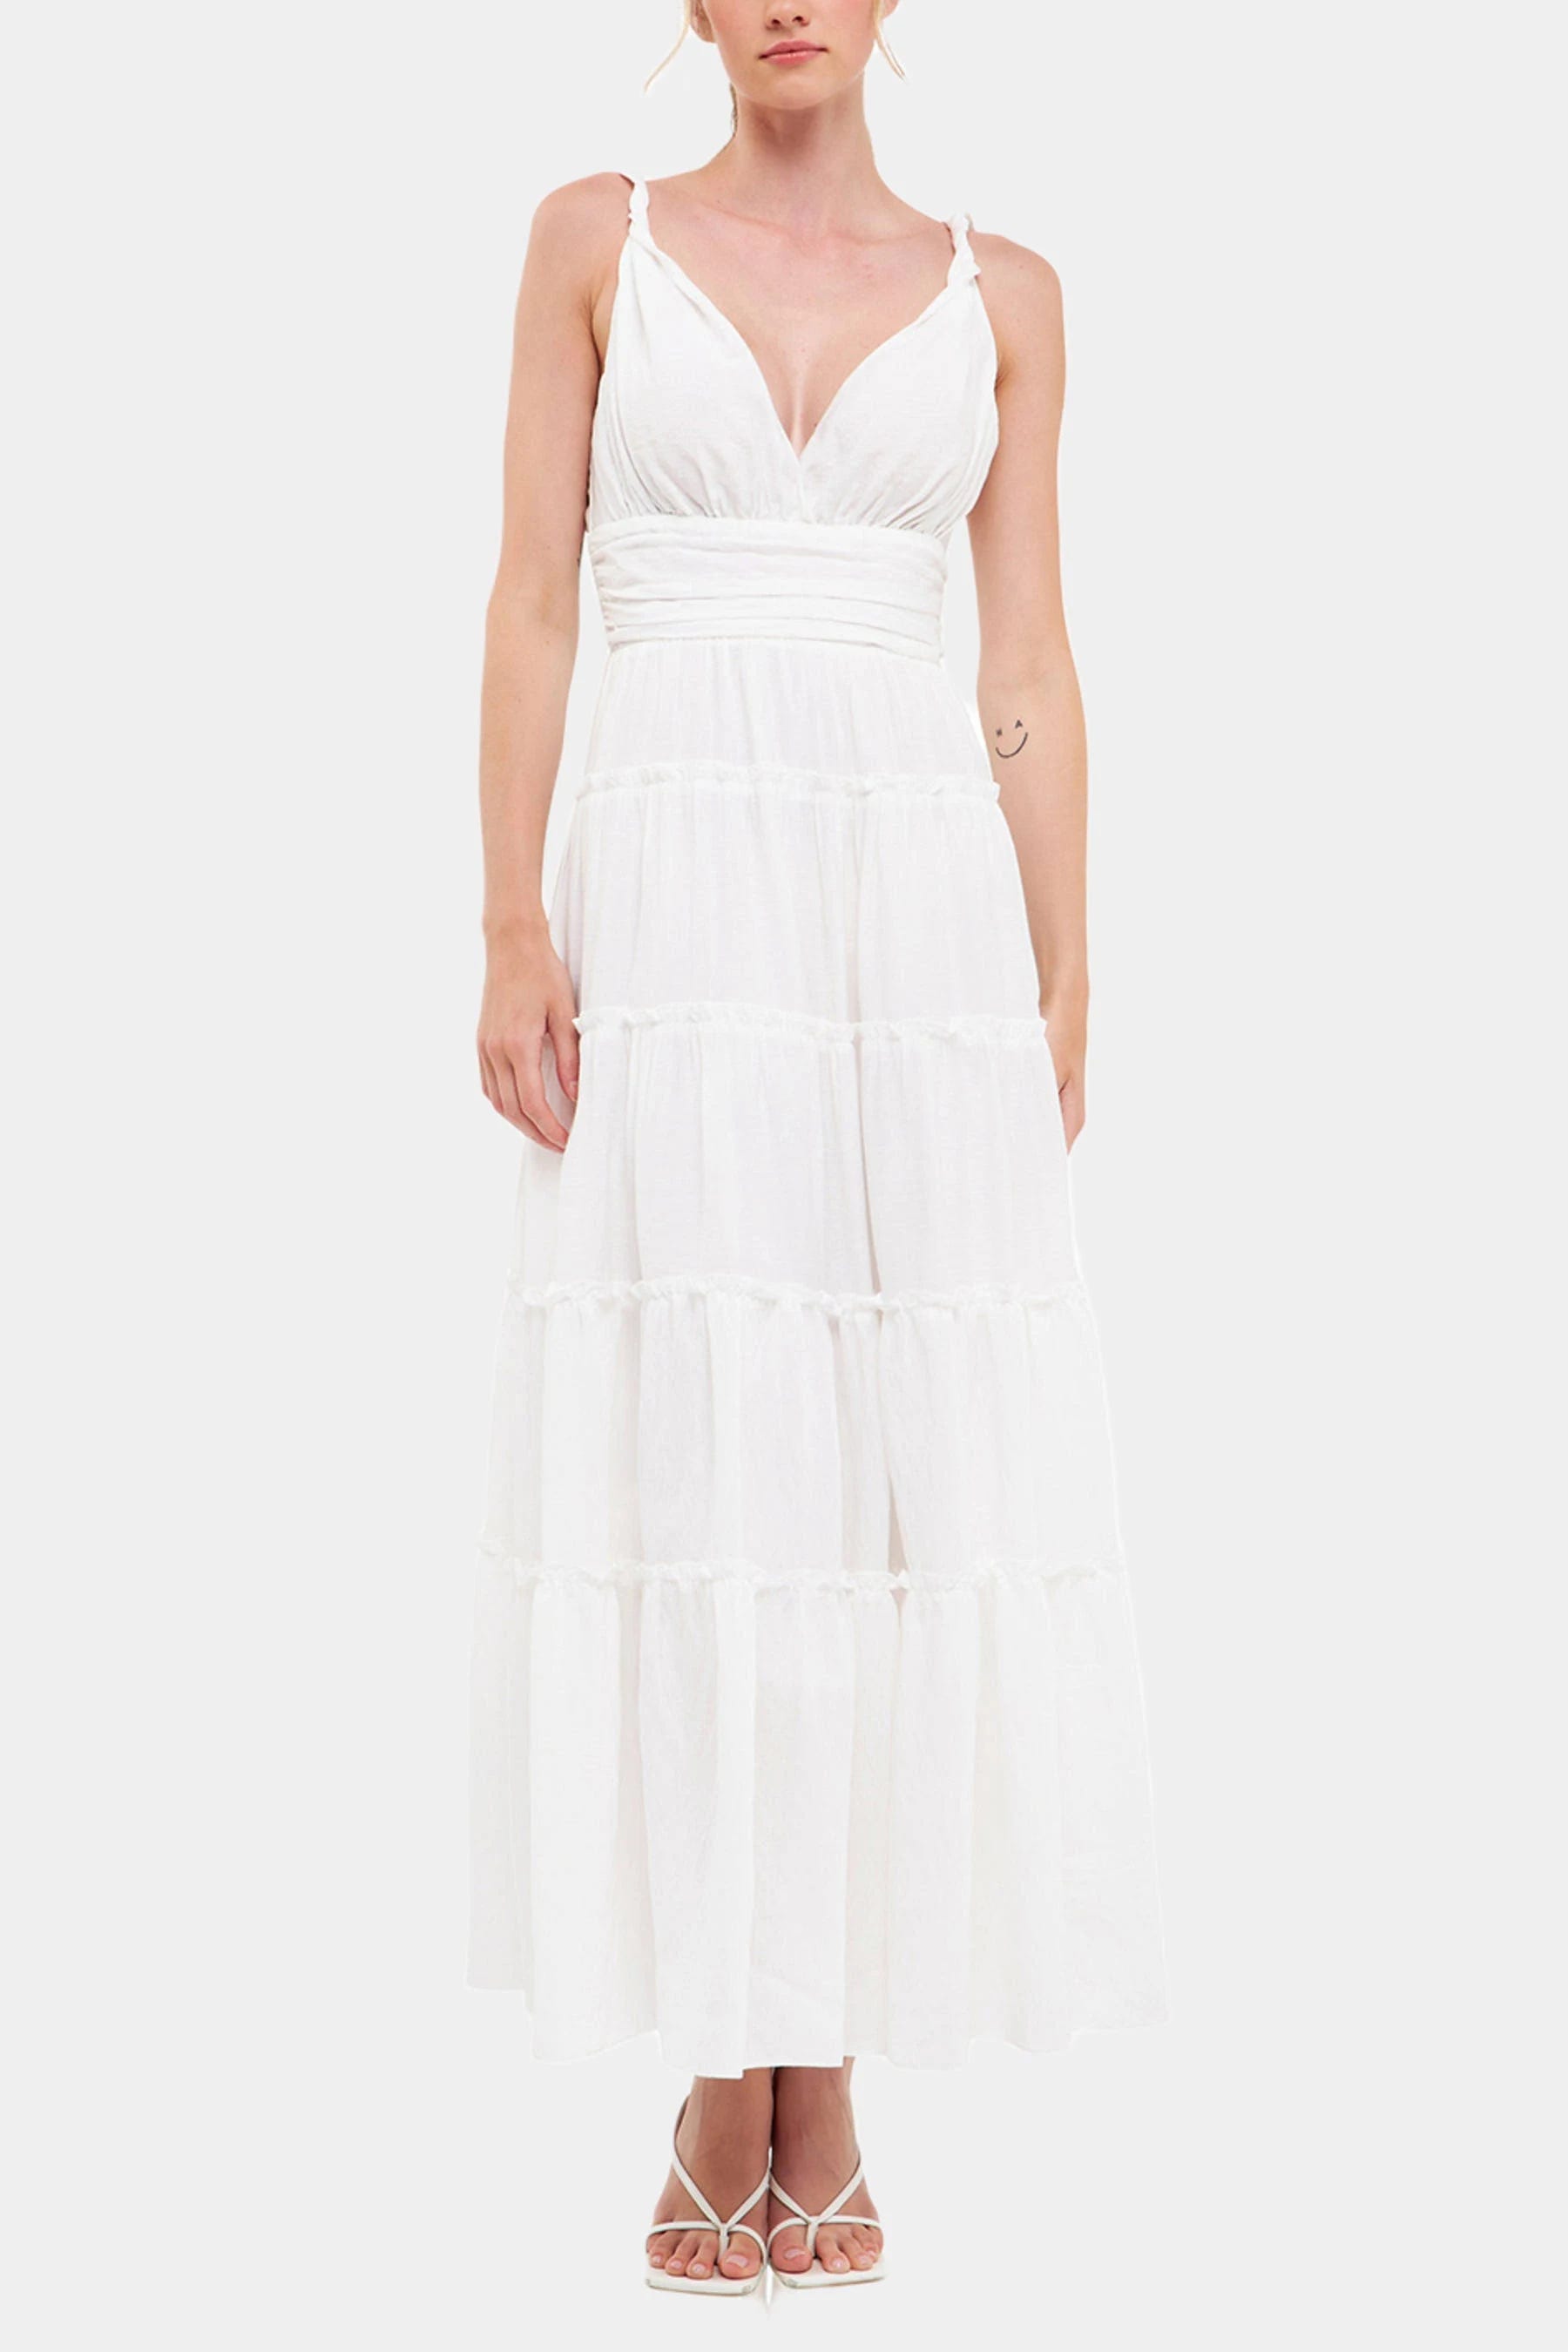 White Twist Ruffled Maxi Dress for Summer Events | Image